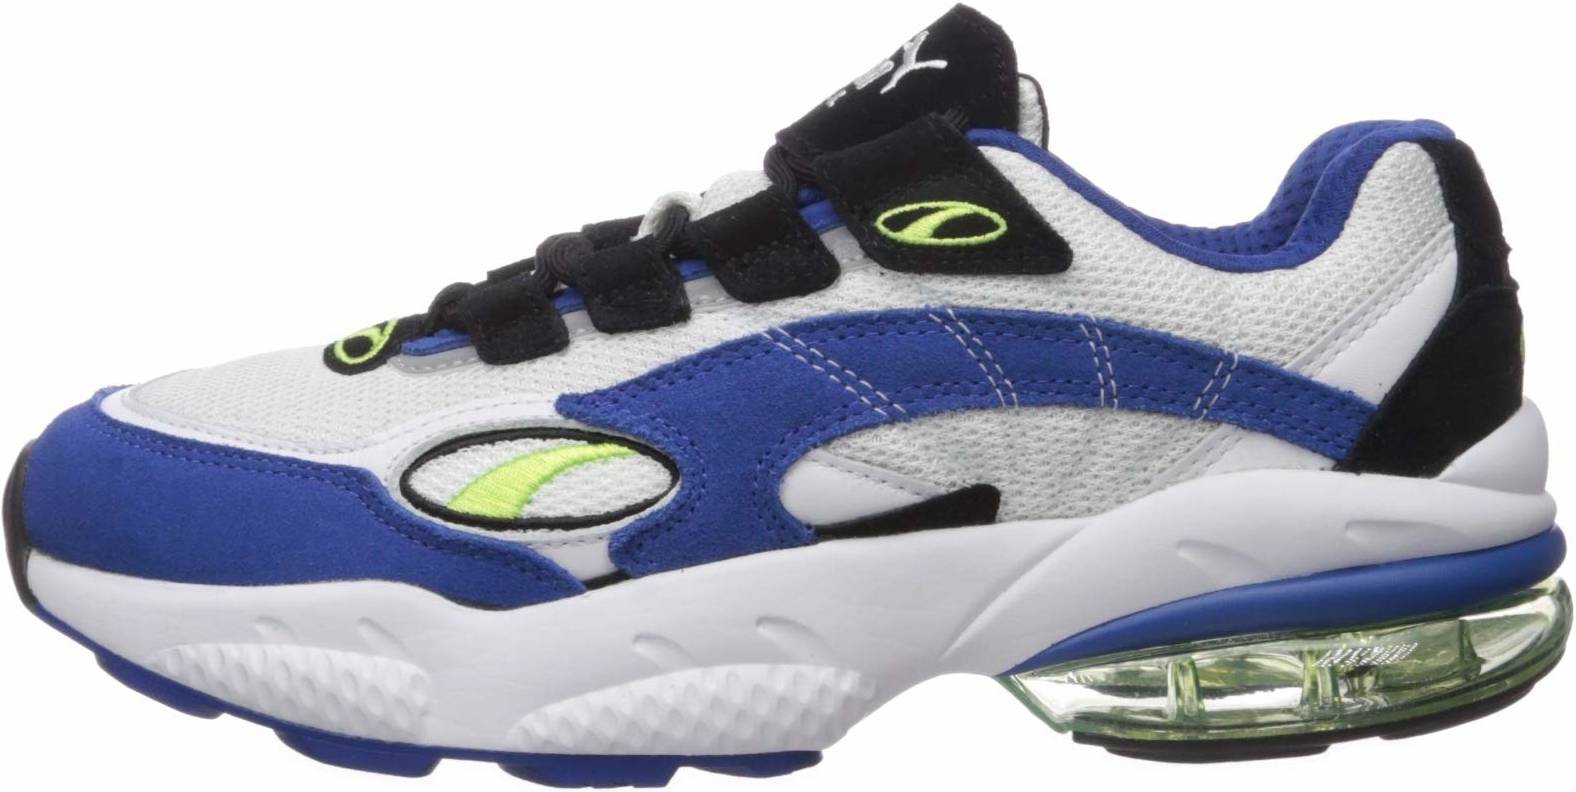 Puma CELL Venom sneakers in 5 colors (only $30) | RunRepeat